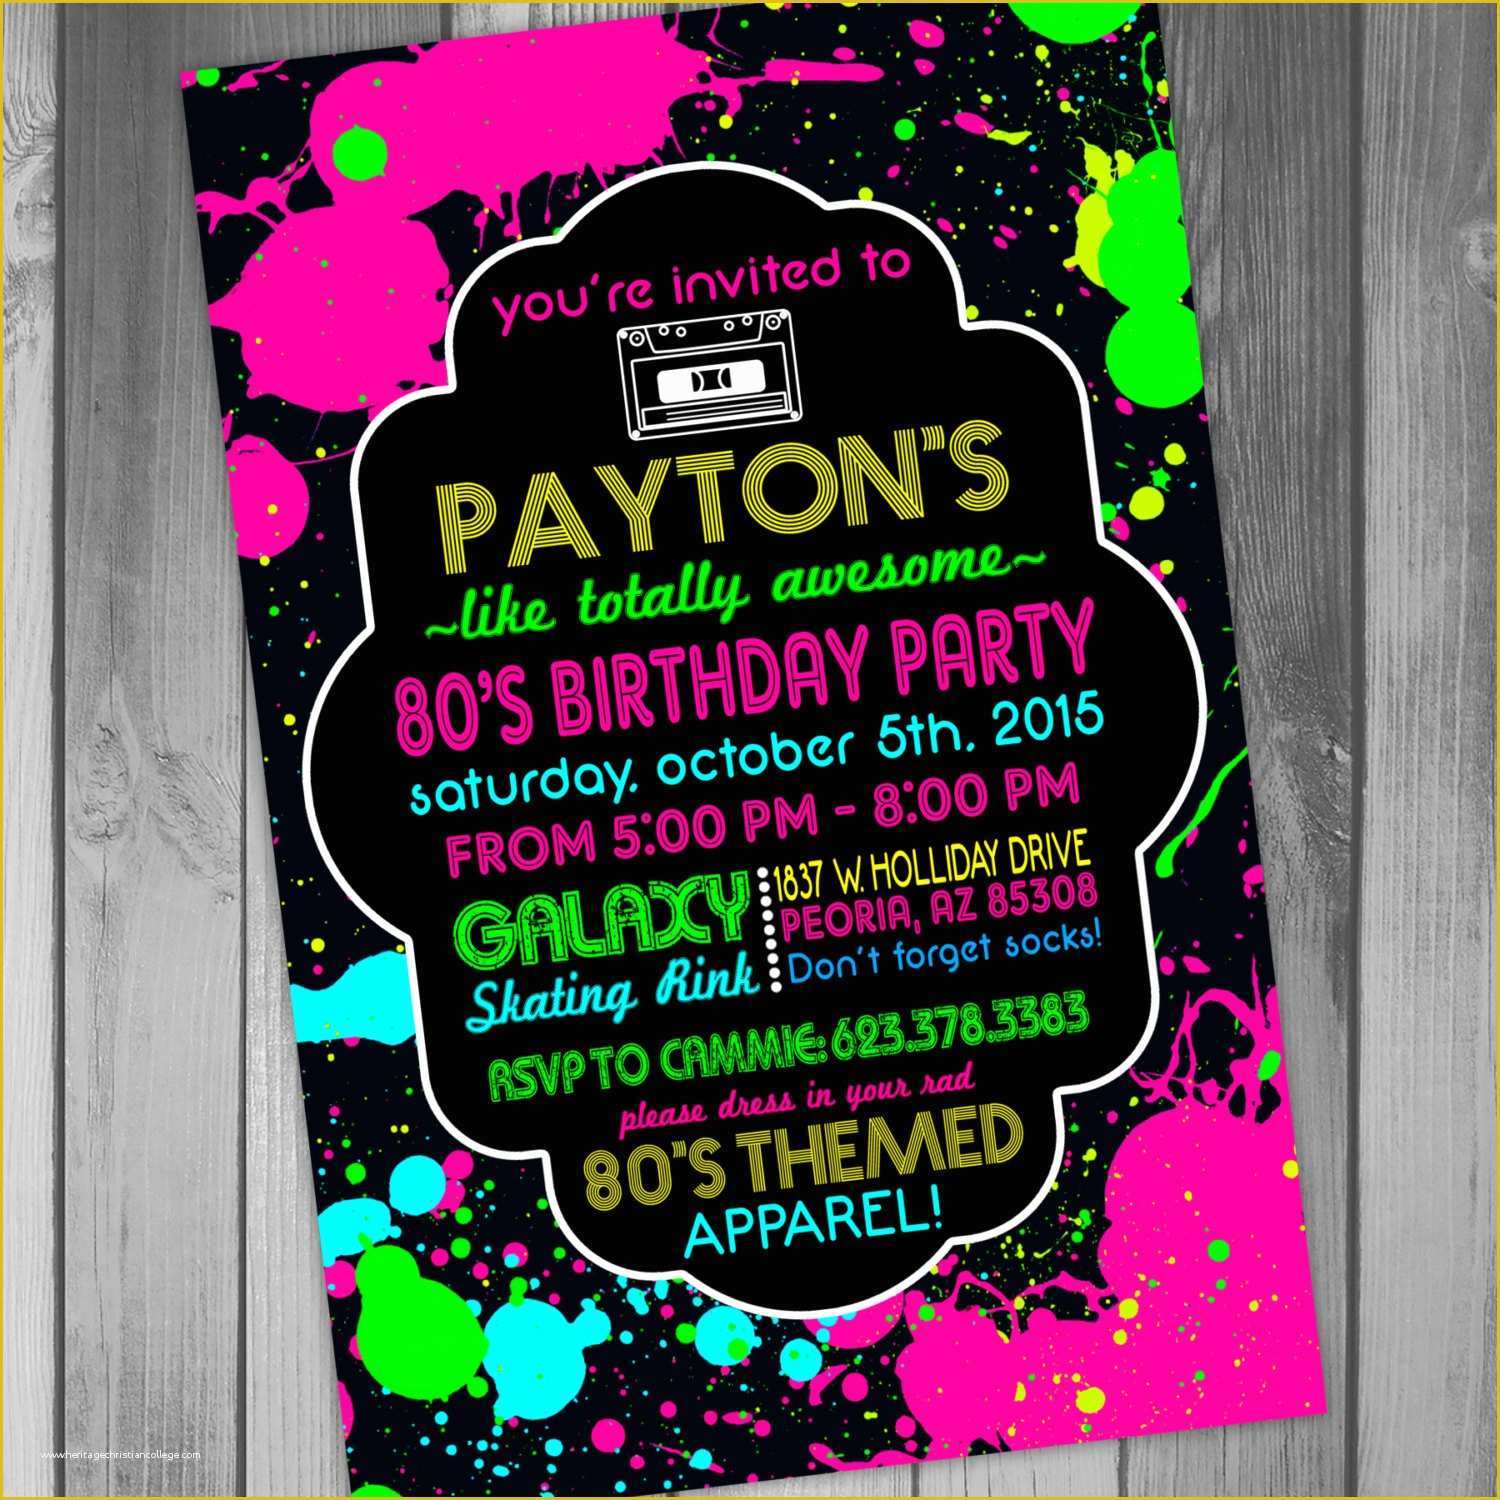 Neon Party Invitations Templates Free Of Skating Birthday Party Invitations Neon Party Invitations